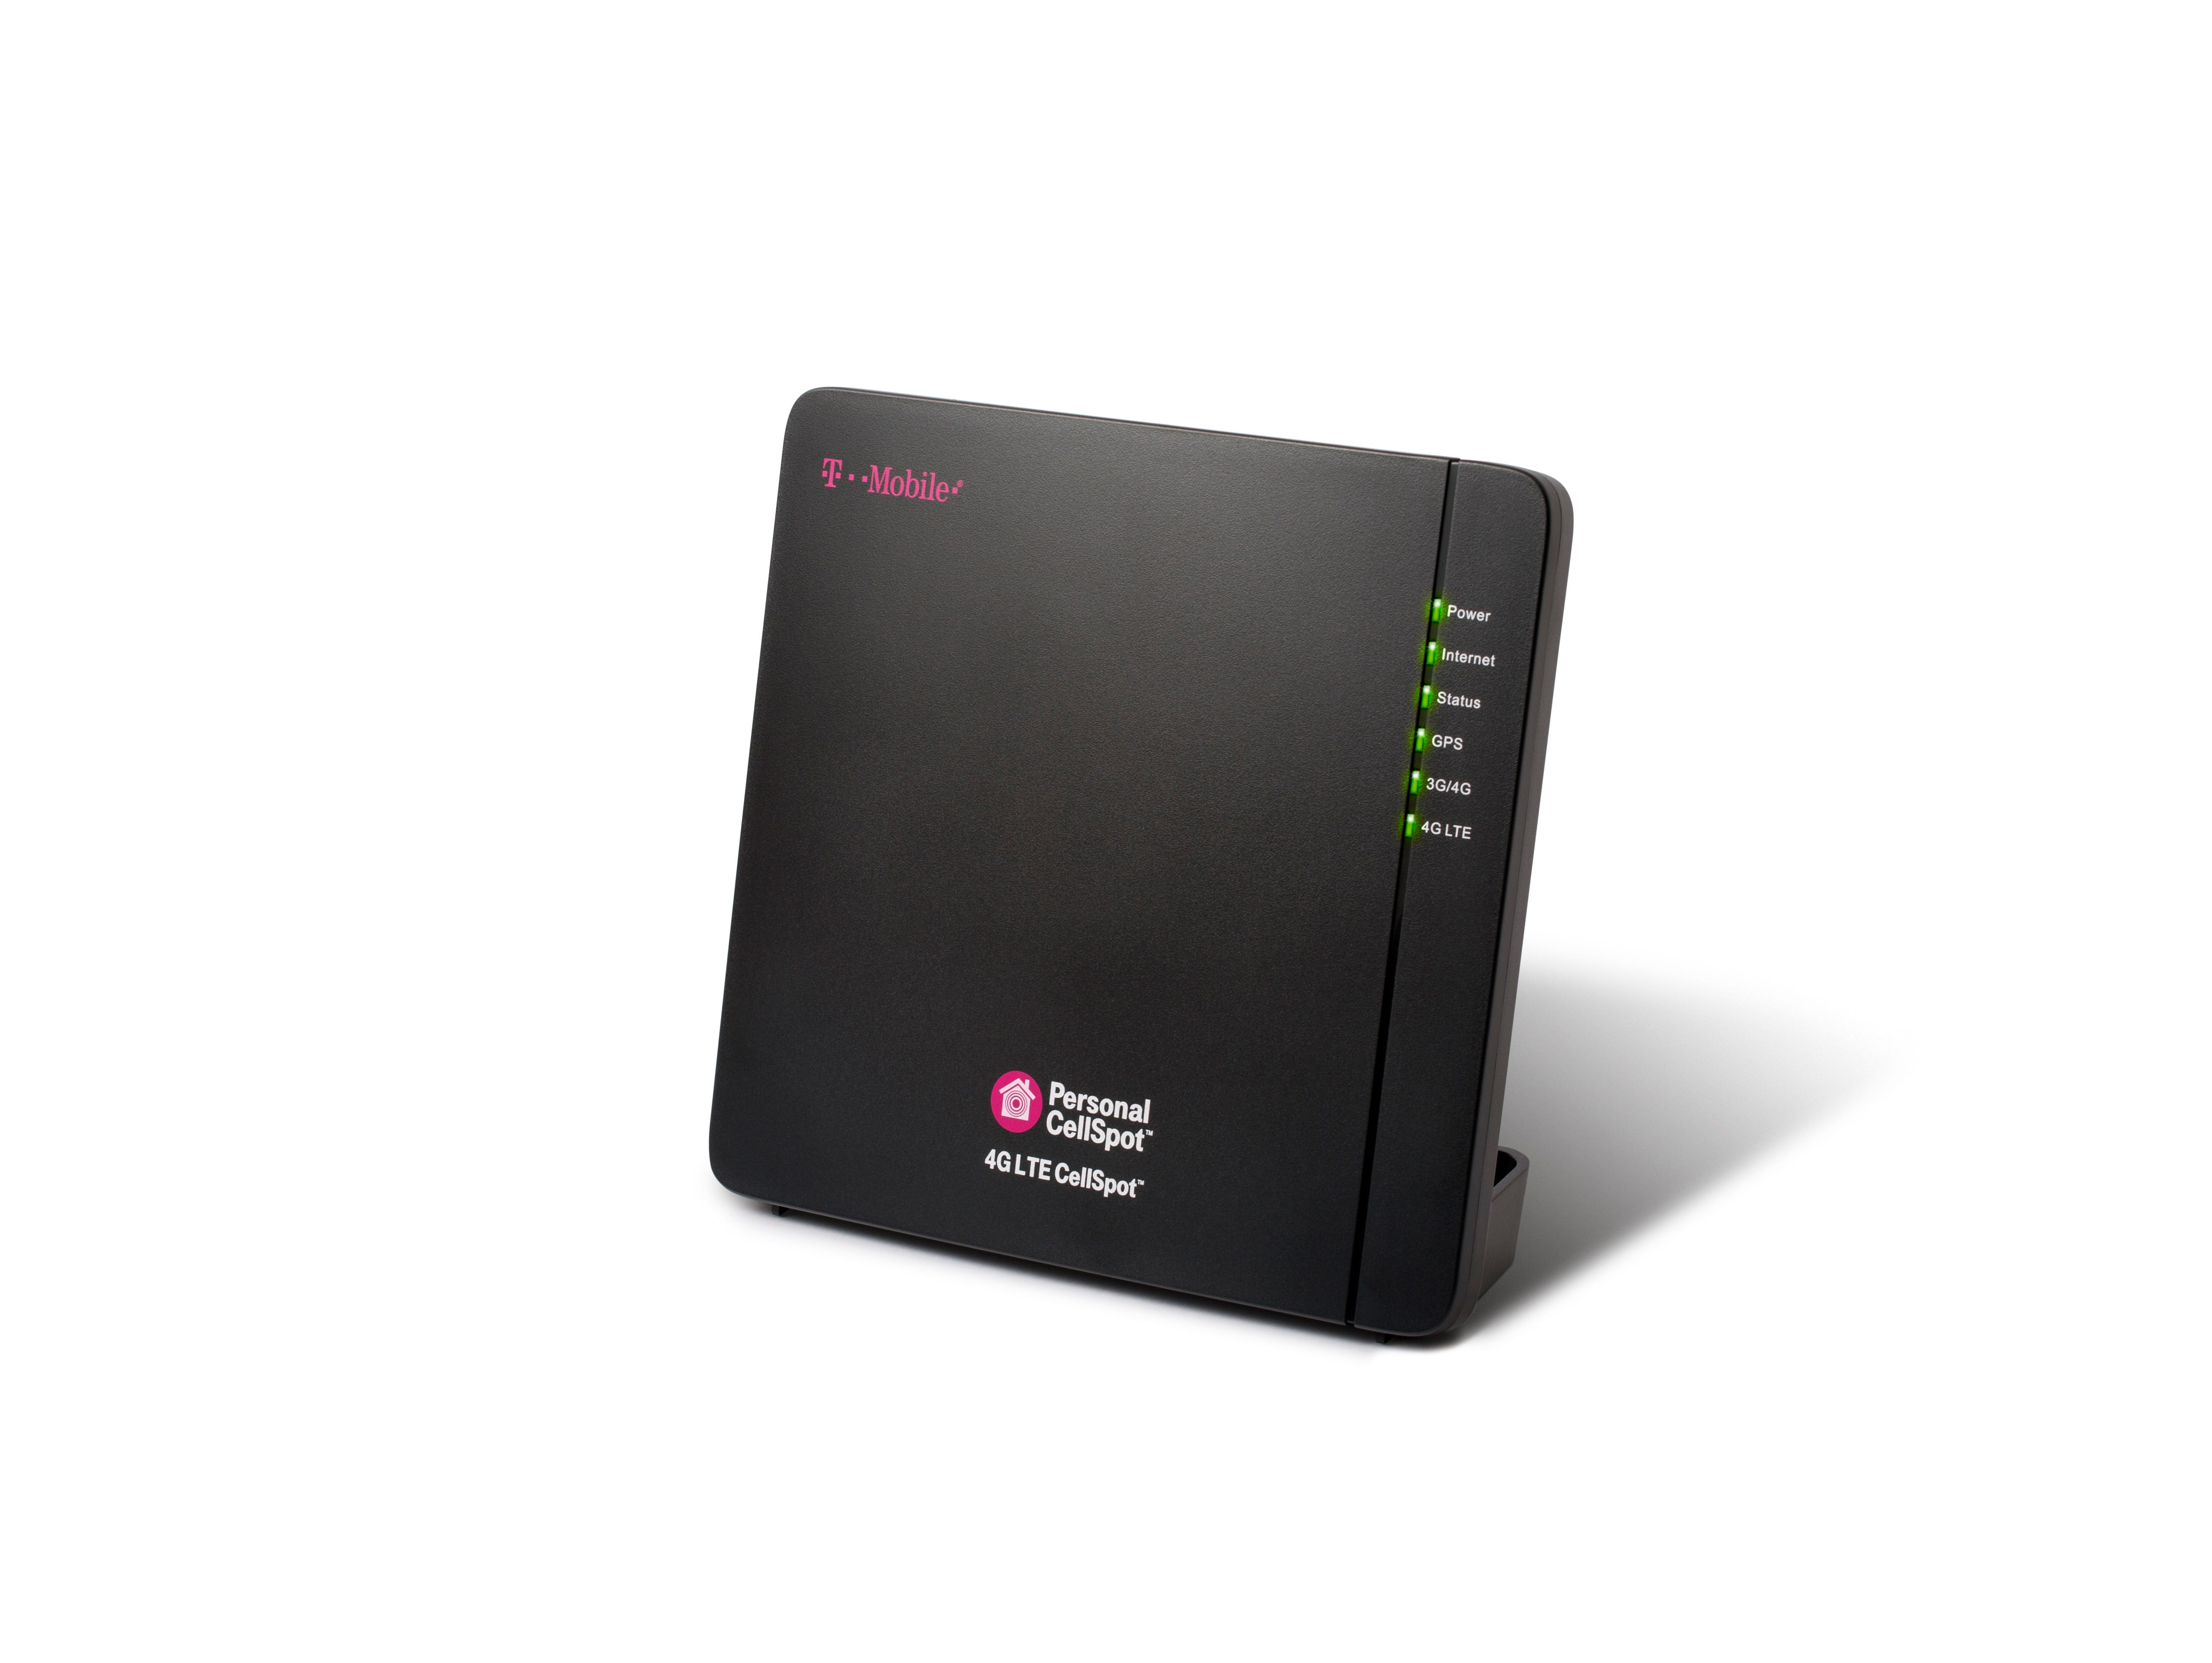 The 4G LTE CellSpot is a like a mini-tower for your house or office.